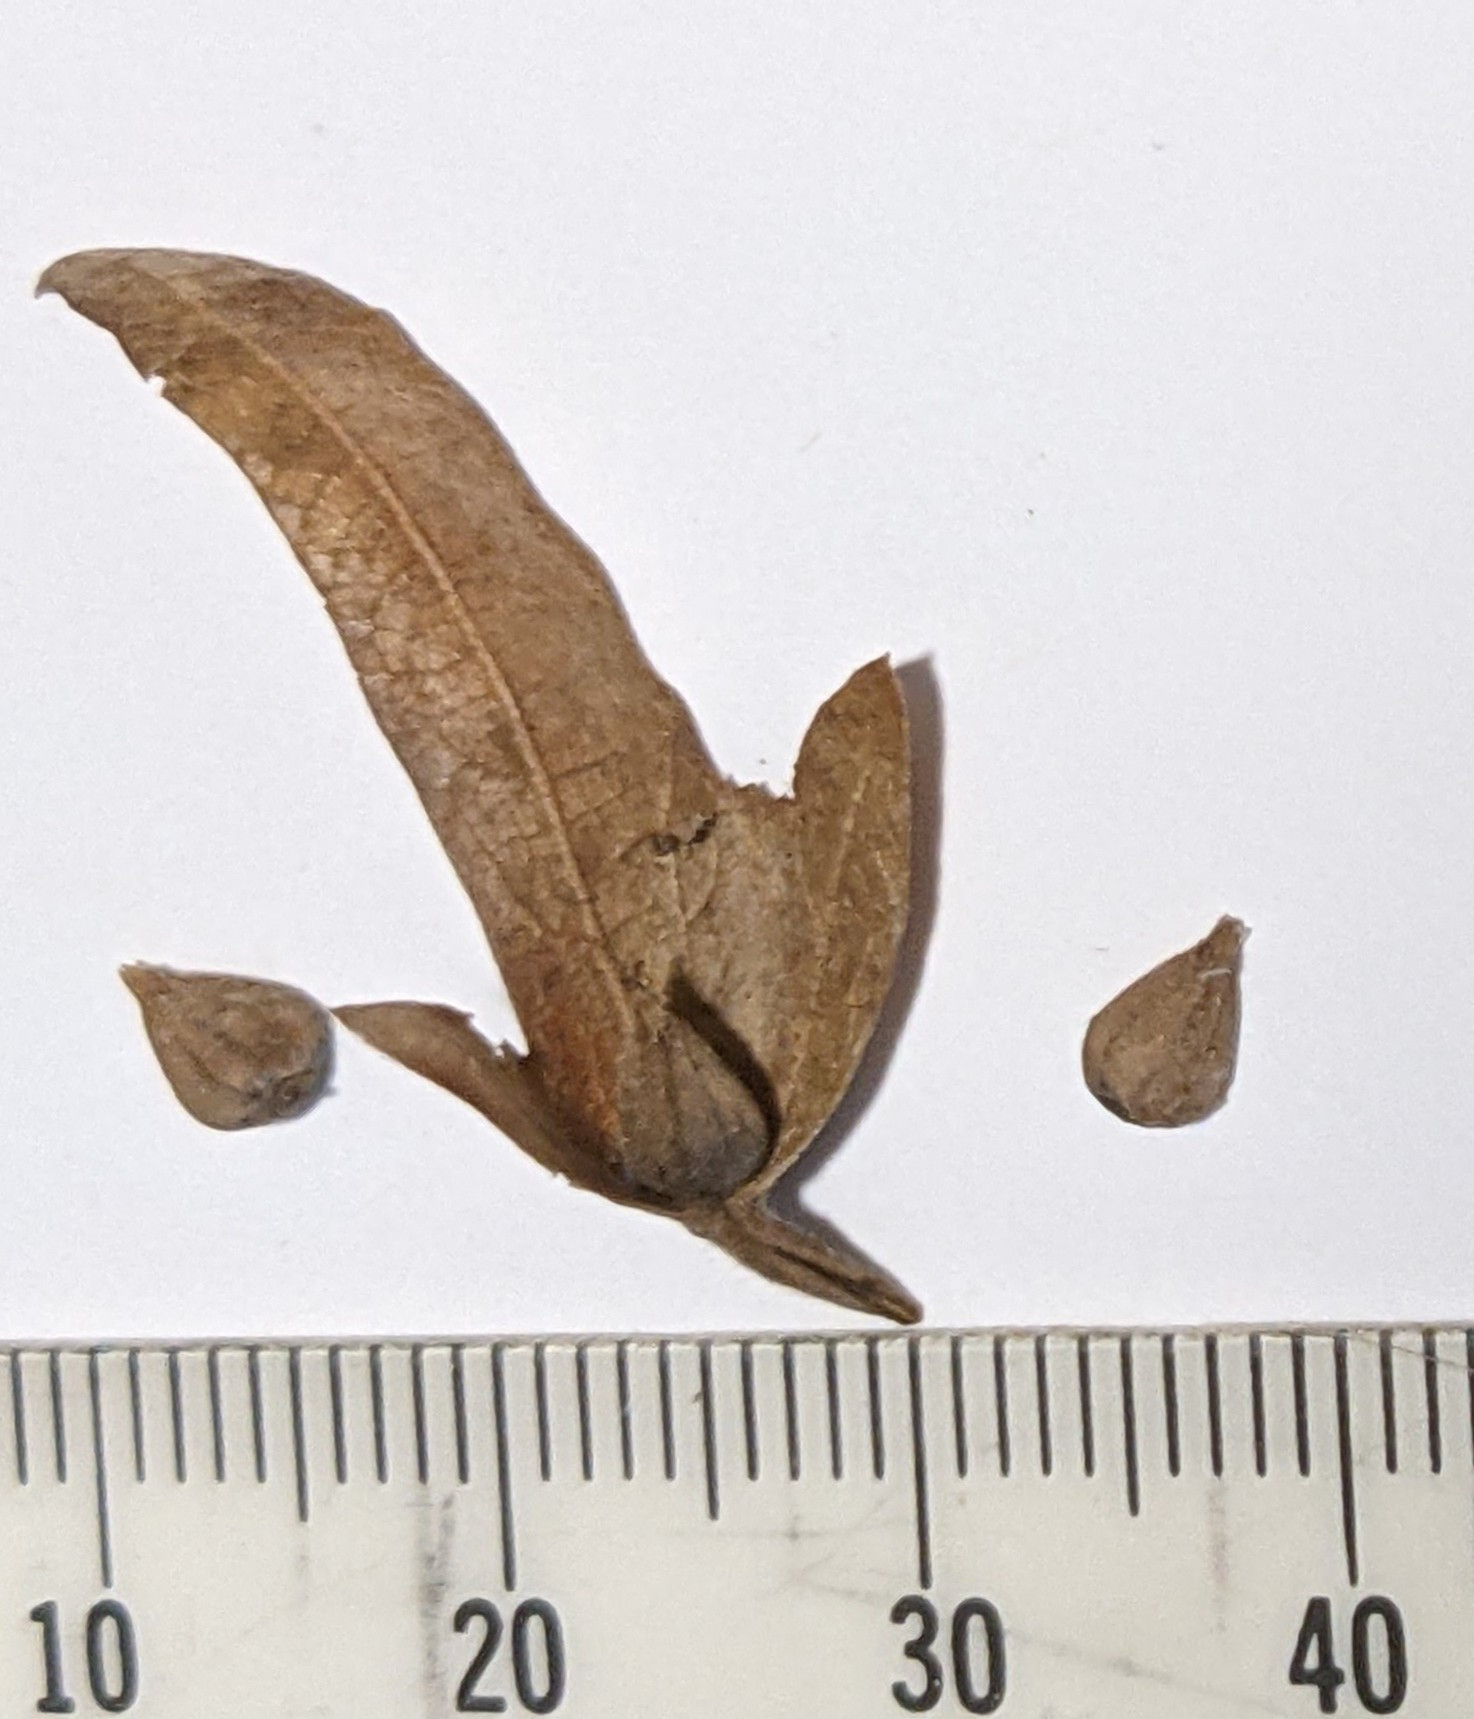 The Scientific Name is Carpinus caroliniana. You will likely hear them called American Hornbeam, Ironwood, Musclewood, Blue Beech. This picture shows the Leafy bract, enclosing a small nut. of Carpinus caroliniana